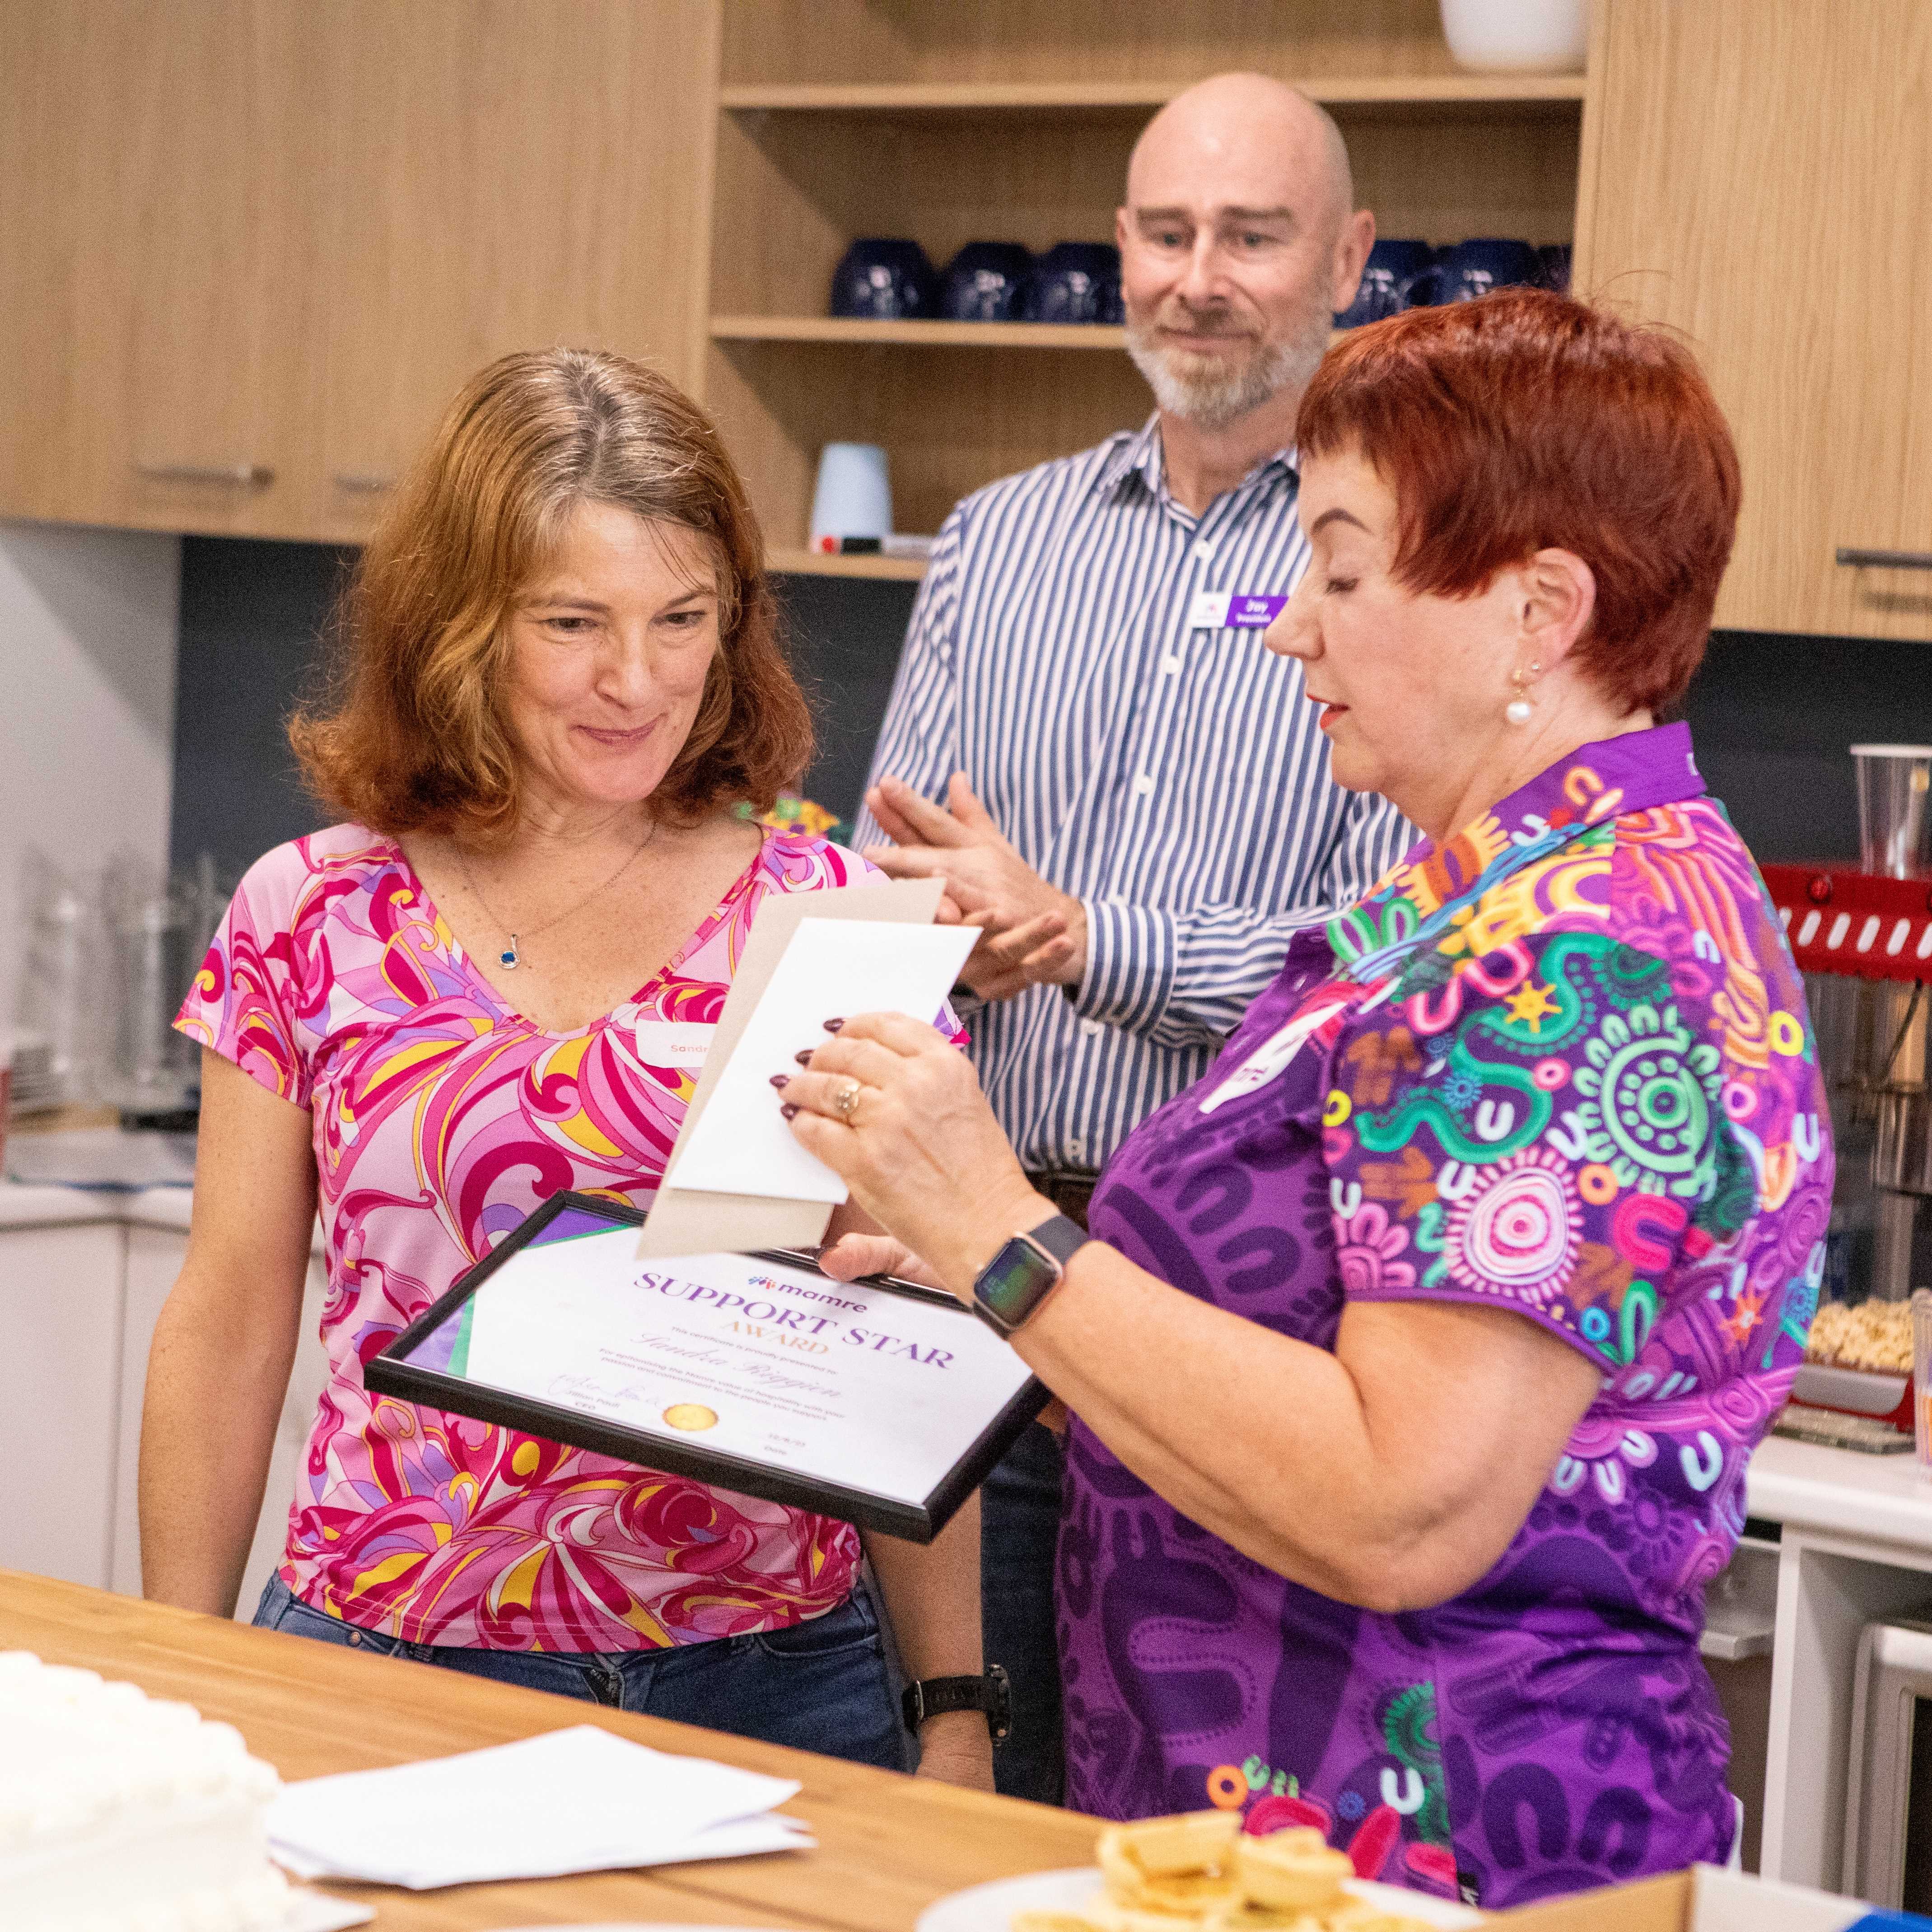 Support Worker Sandy receives a certificate and gift for the Support Star Award from Mamre CEO Jillian Paull while Mamre Board President Jay Emmerton watches in the background.